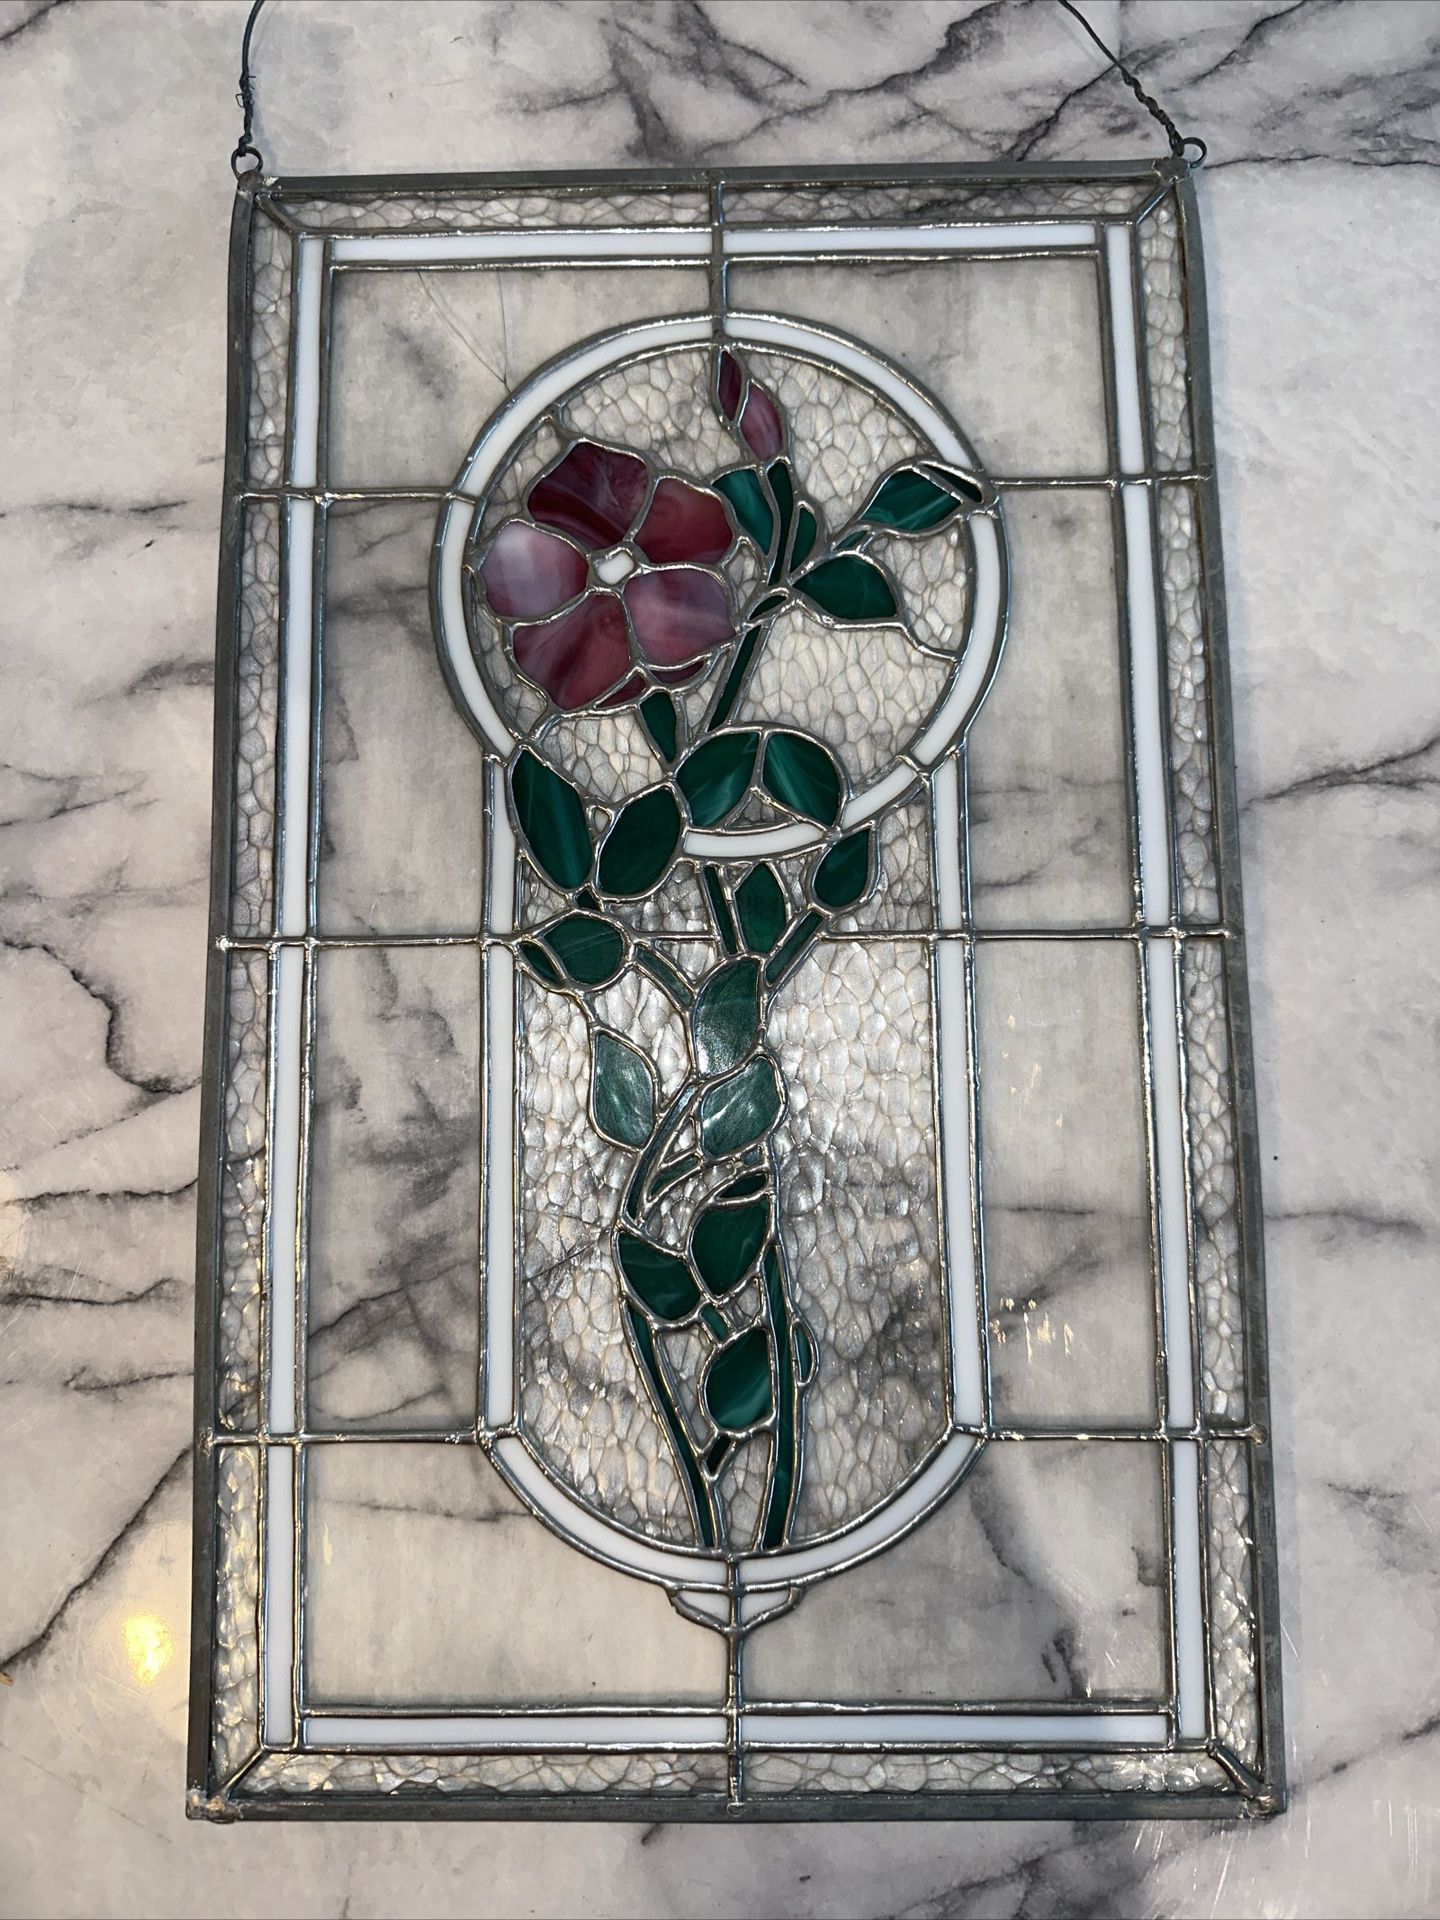  Vintage Leaded Stained Glass Hanging Window Panel 20x12" Flower Handmade Pink